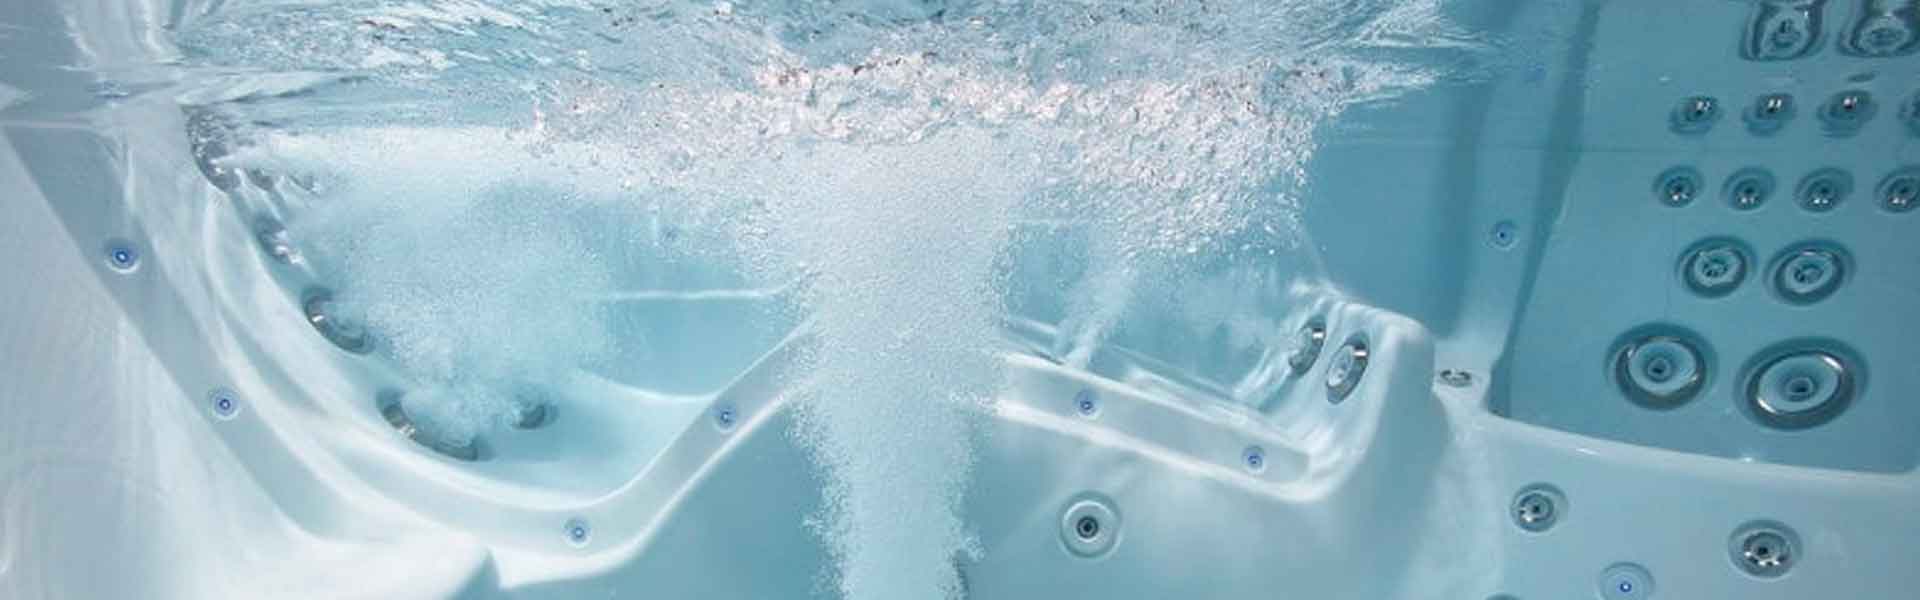 What Is the Best Massage Option from Top Hot Tub Brands?